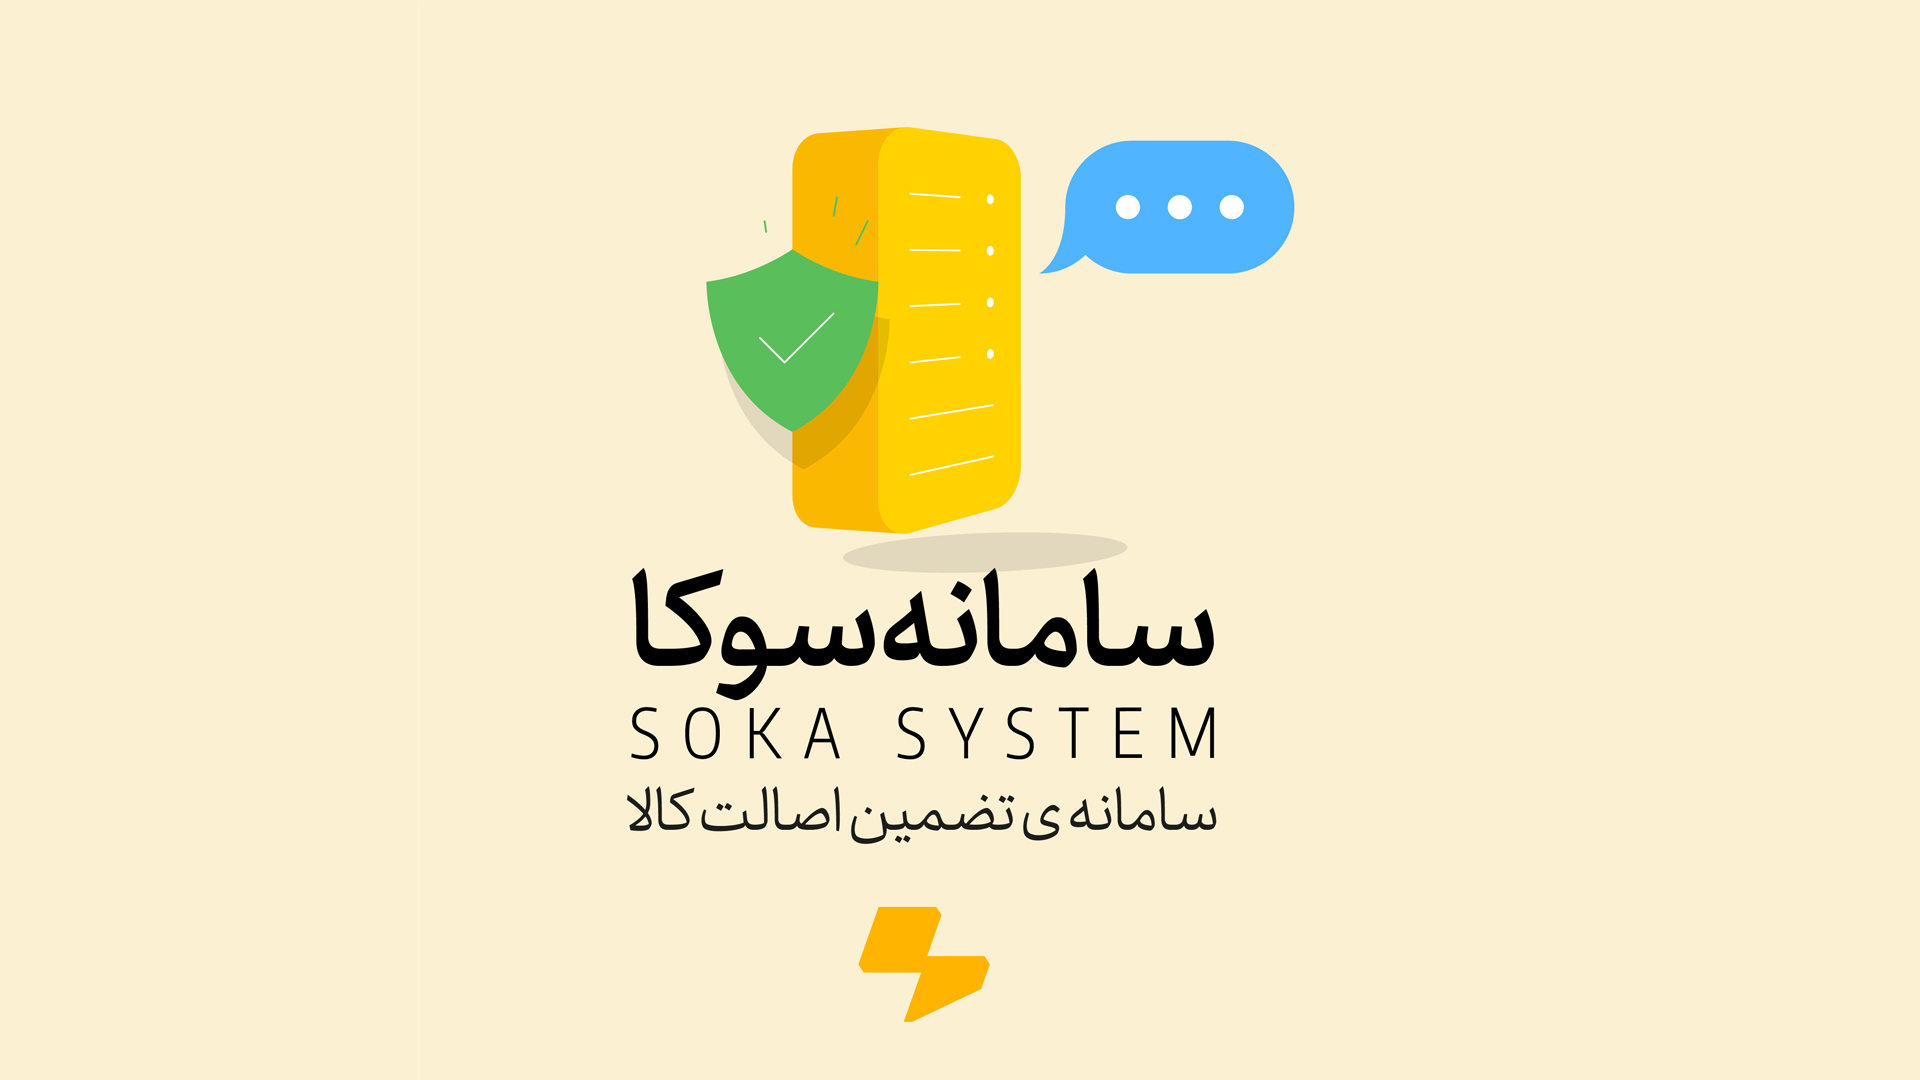                                     Soka system, SMS system to guarantee product authenticity